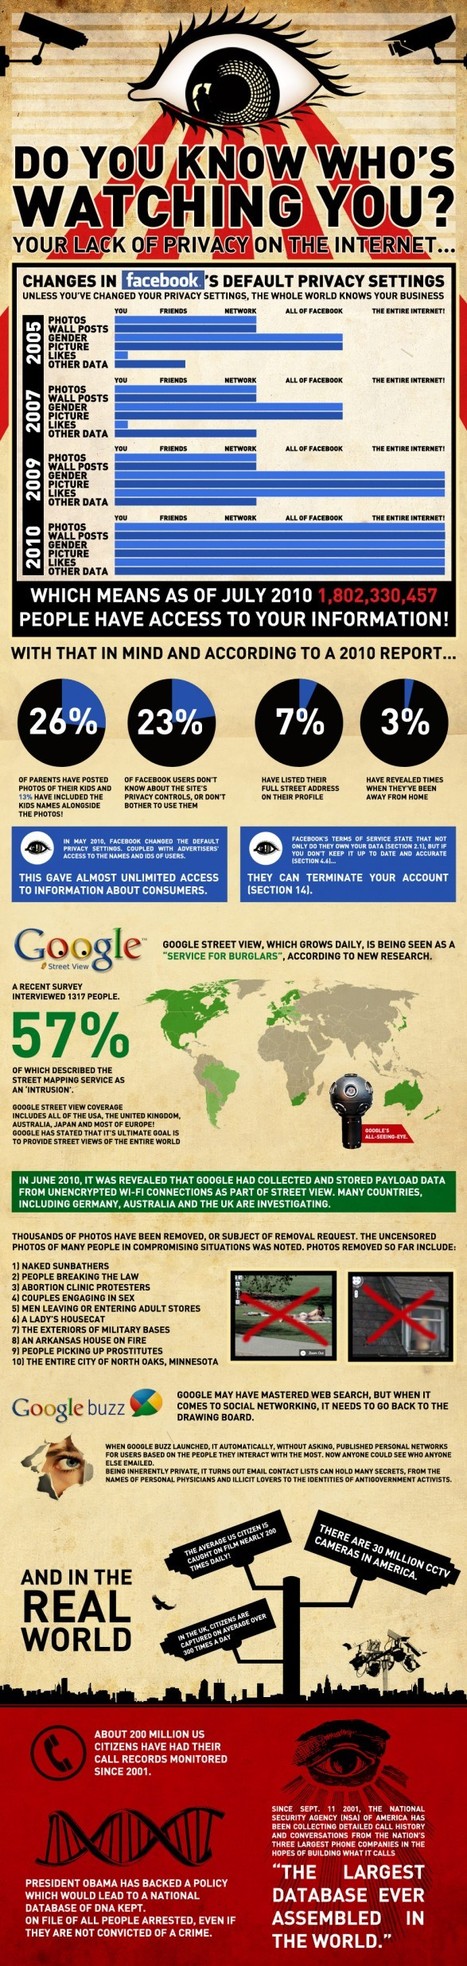 Do You Know Who’s Watching You? [INFOGRAPHIC] | Daily Magazine | Scoop.it